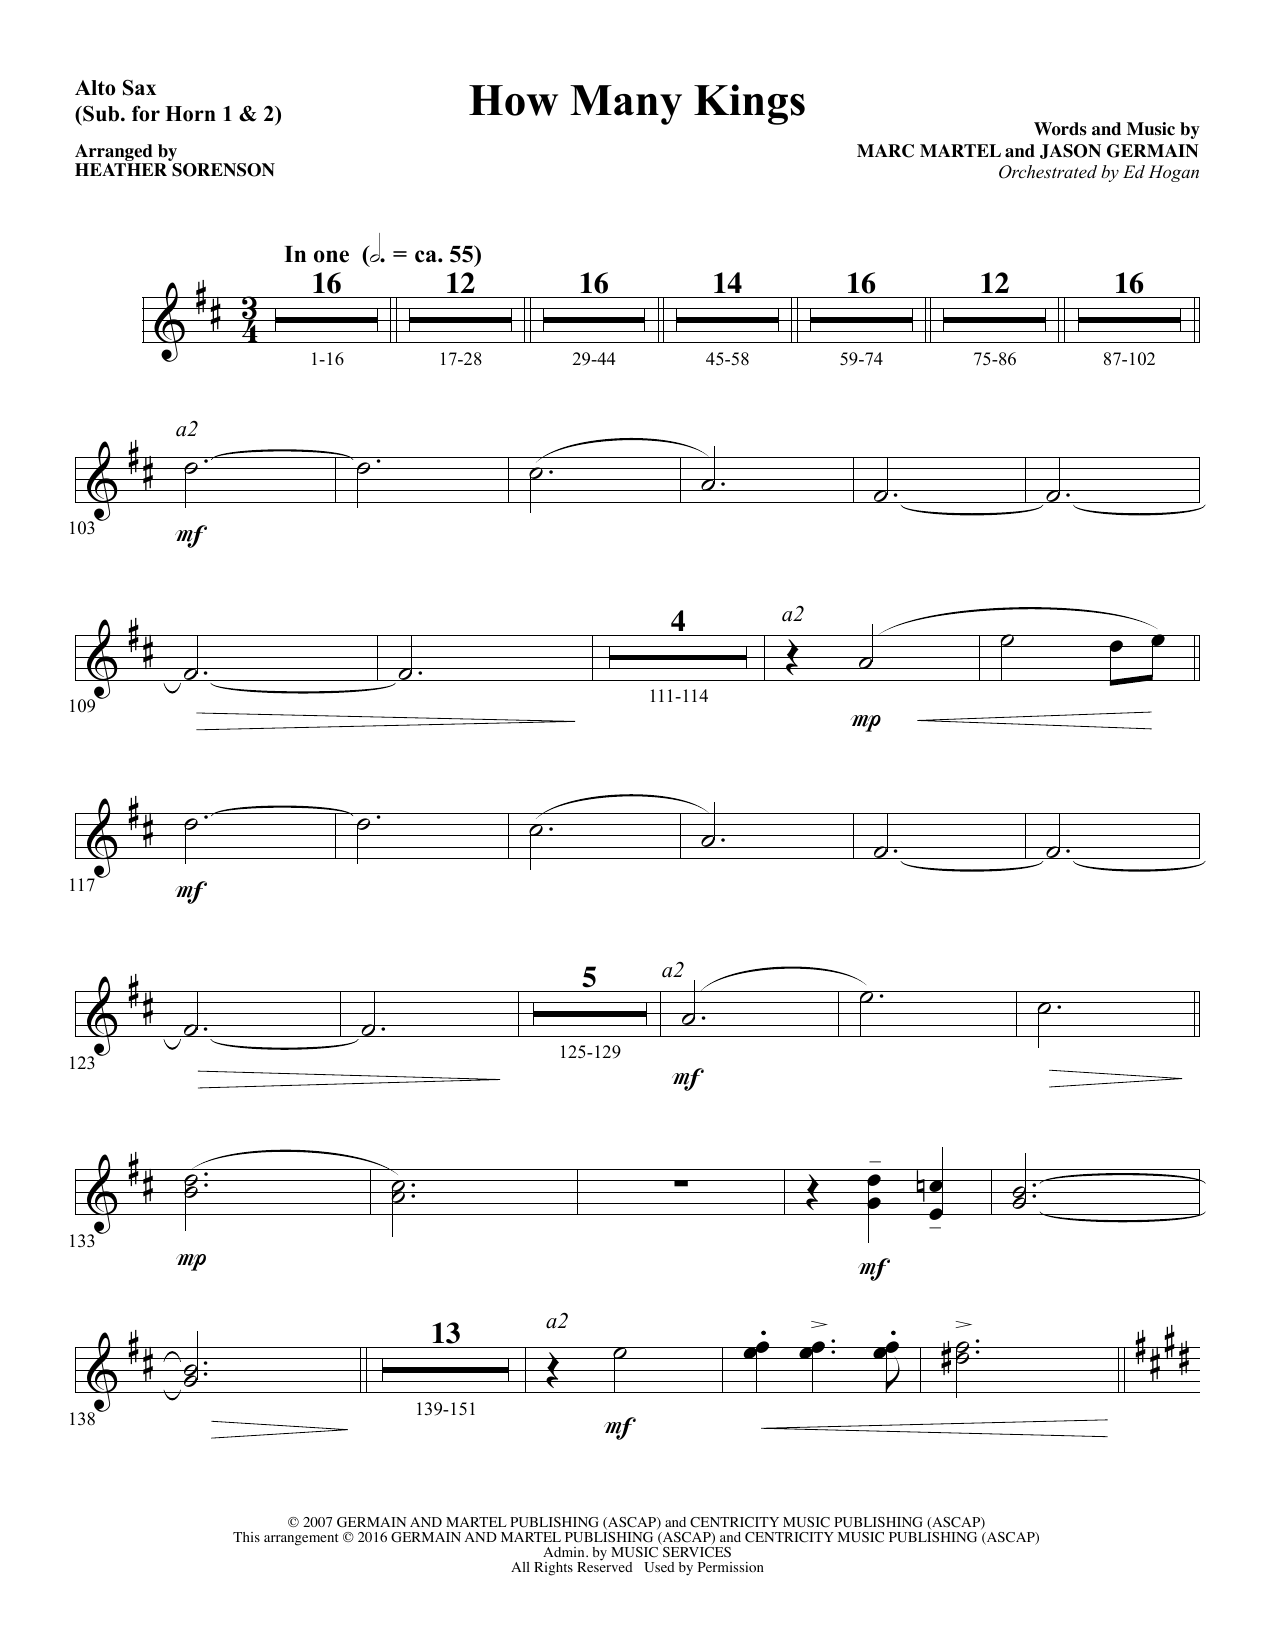 Download Heather Sorenson How Many Kings - Alto Sax 1 & 2 (Sub. Horn) sheet music and printable PDF score & Christian music notes